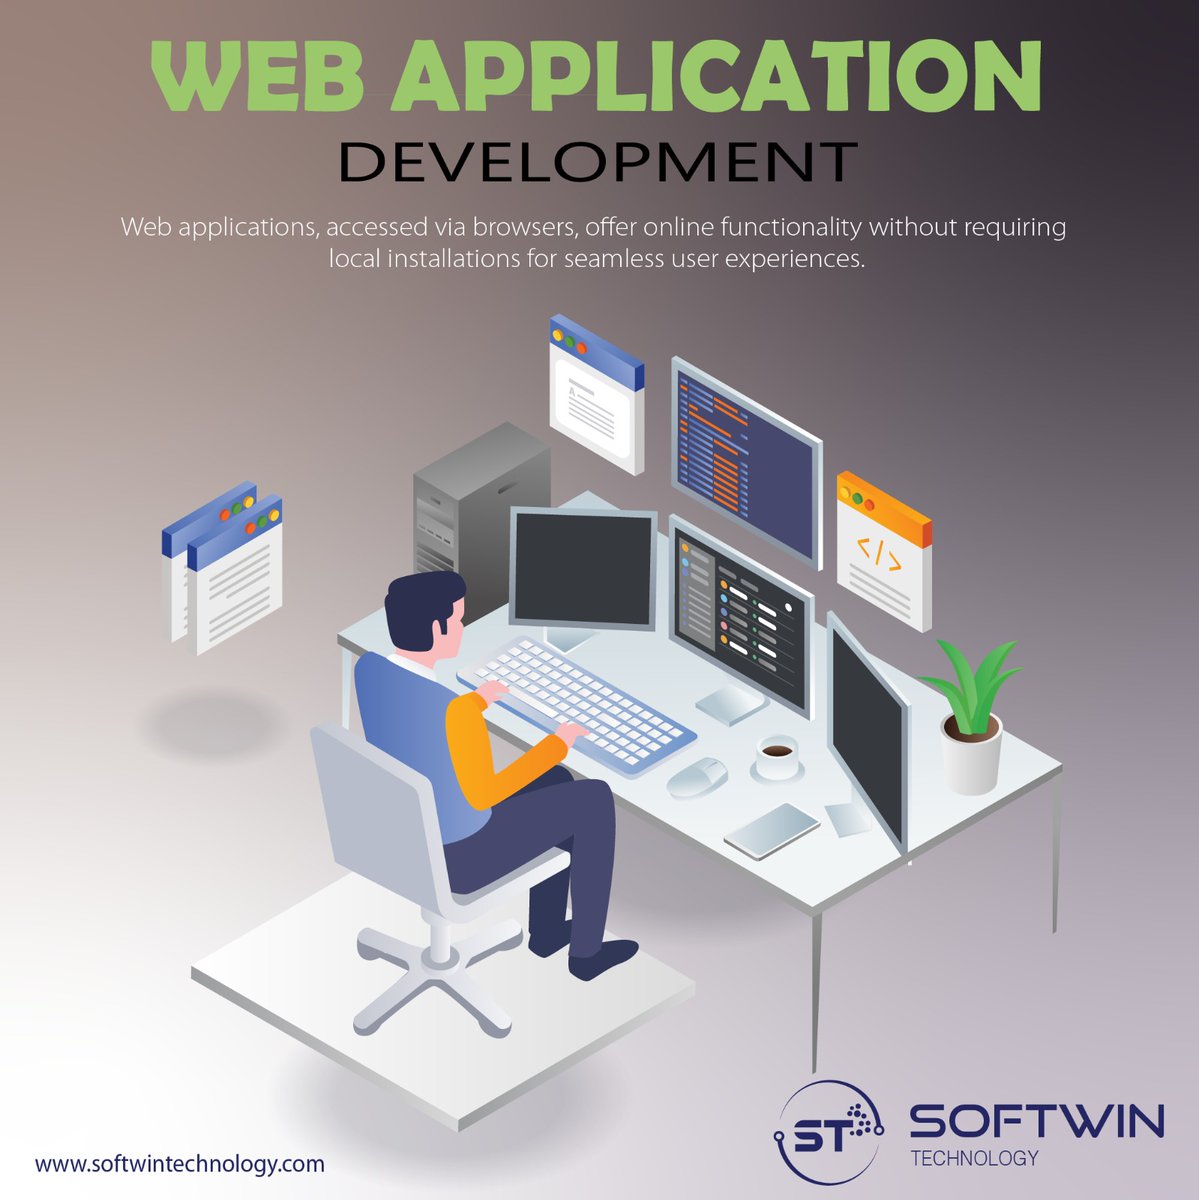 Empowering businesses with custom web applications tailored to their specific requirements. Let us bring your ideas to life in the digital realm.
.
.
#softwintechnology #design #applicationmobile #webapplicationdevelopment 🖥📈💻